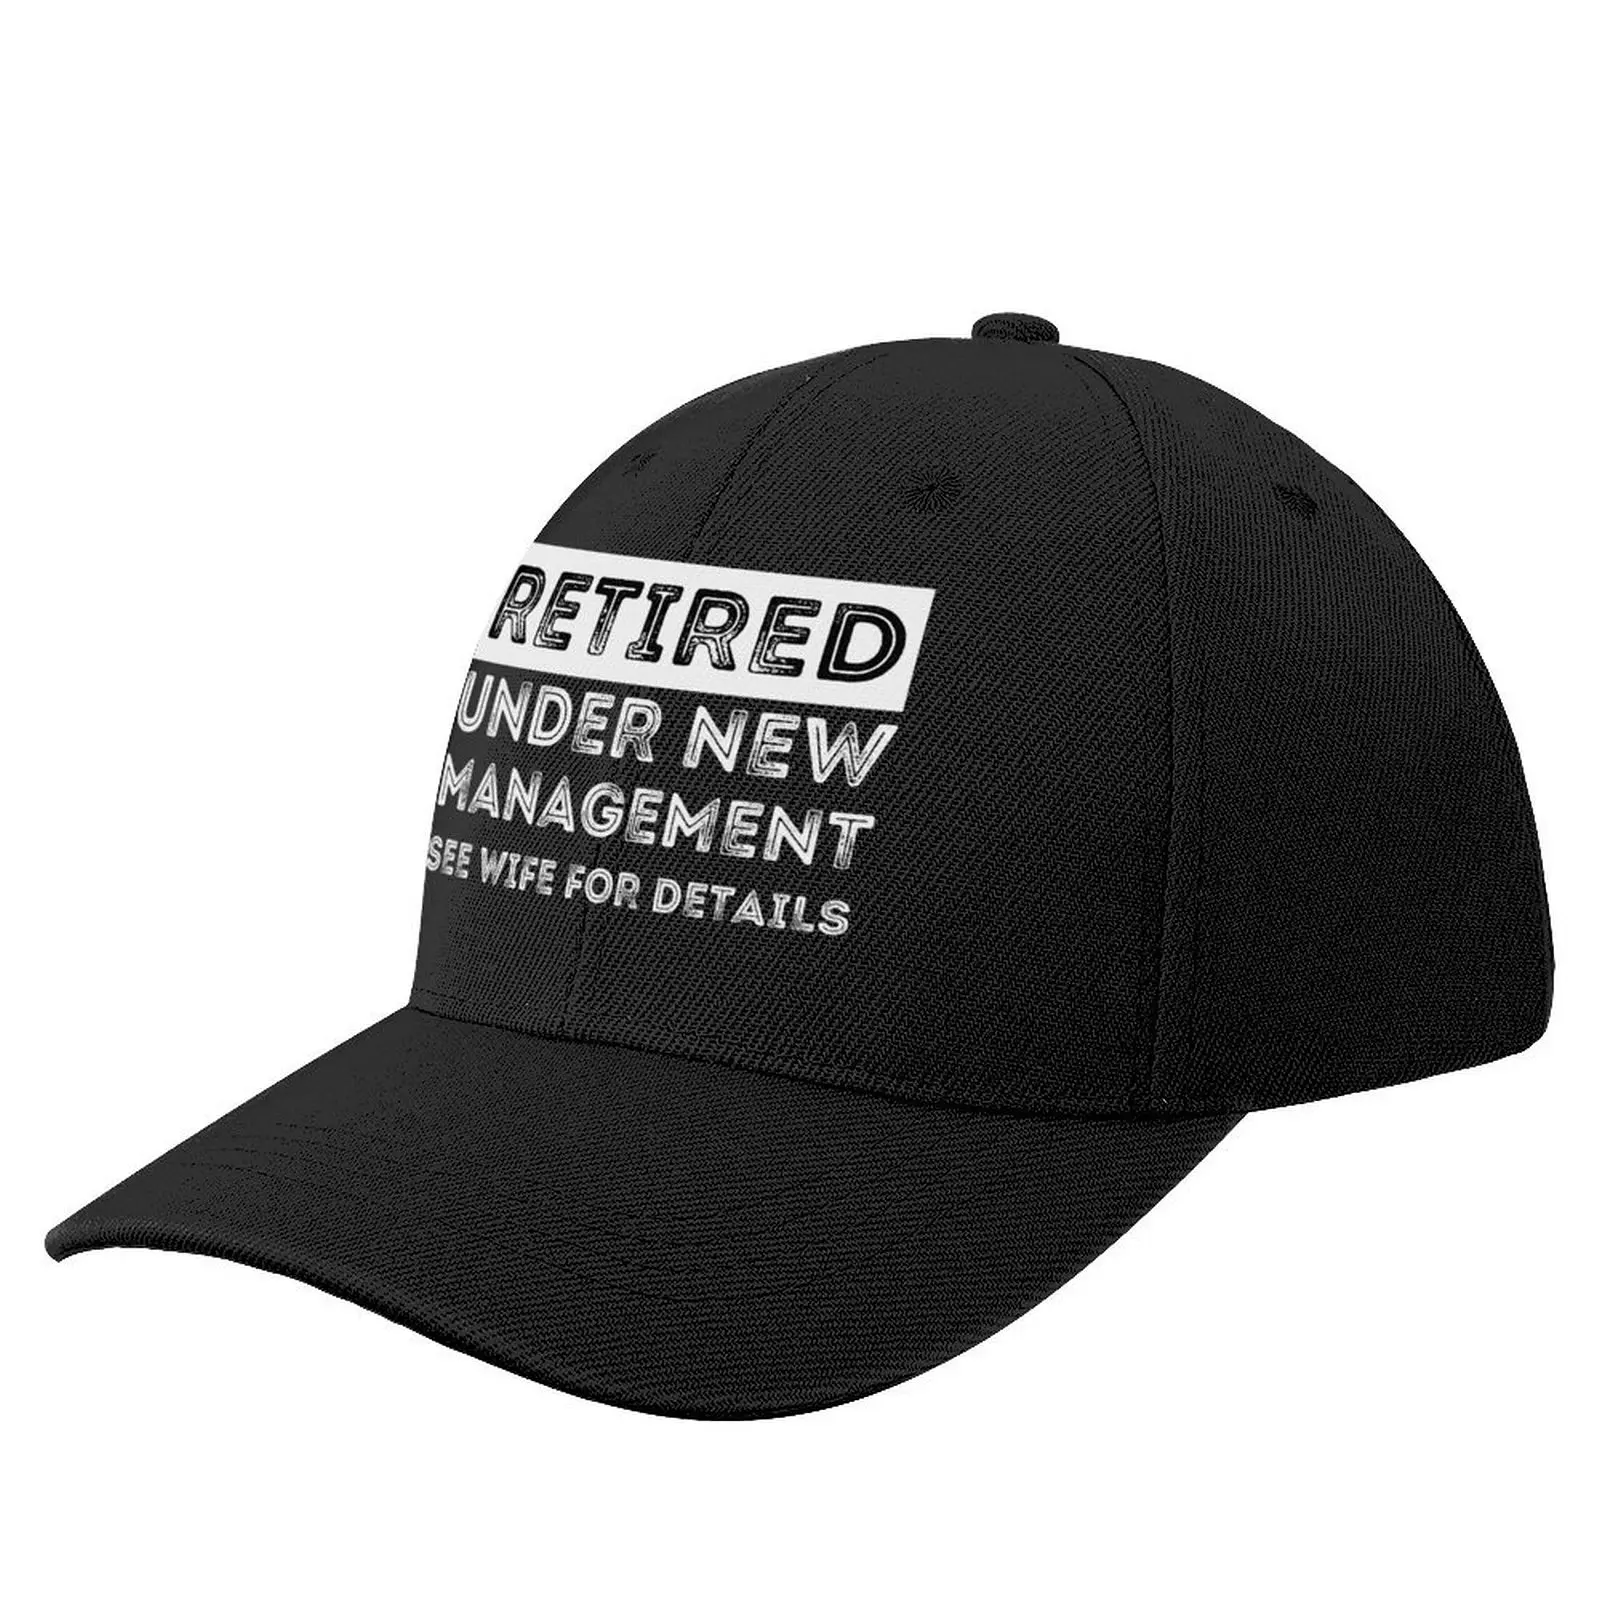 

RETIRED UNDER NEW MANAGEMENT SEE WIFE FOR DETAILS Baseball Cap New In The Hat Rave Caps For Men Women's